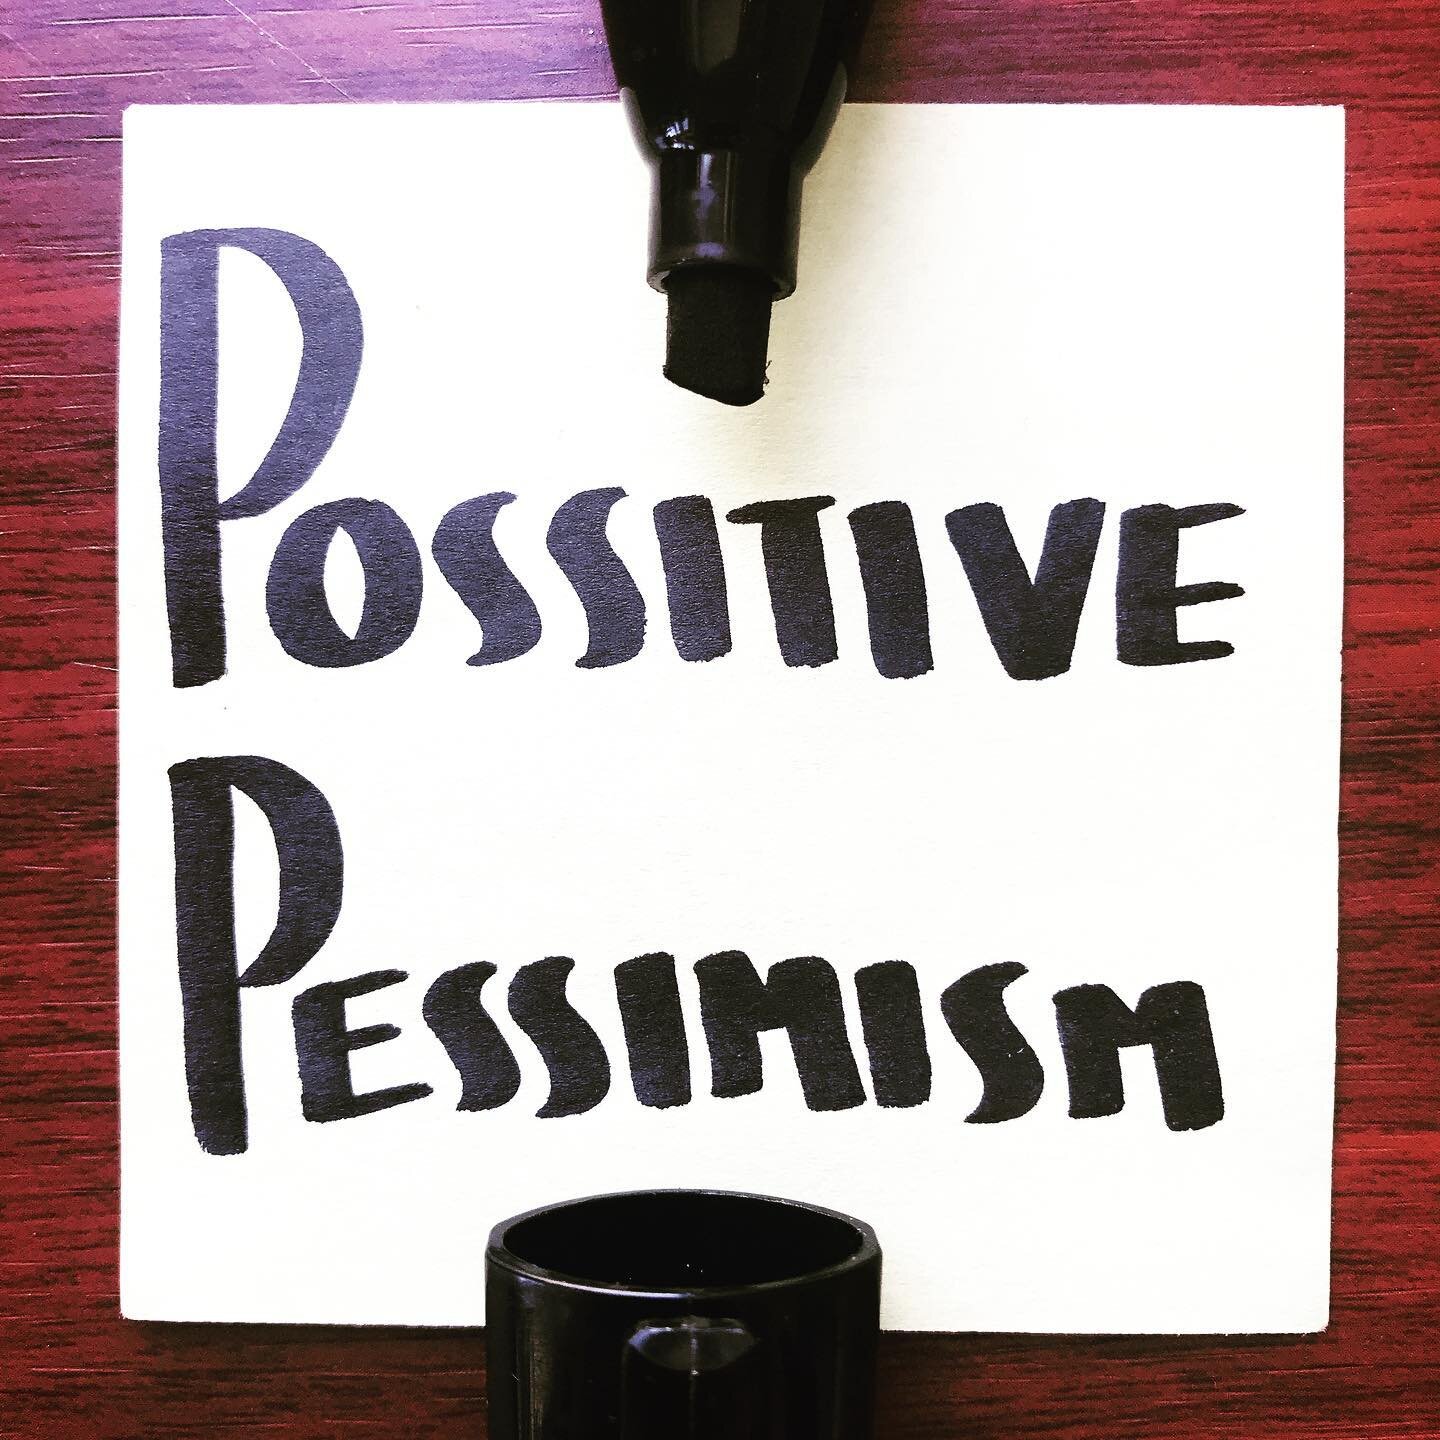 I have a new friend I met early this year who is quite on the logic-heavy side, and considers himself a pessimism. His asterisk to accompany that statement is he&rsquo;s a *positive* pessimist. Meaning, he prepares for the worst (the second half of t